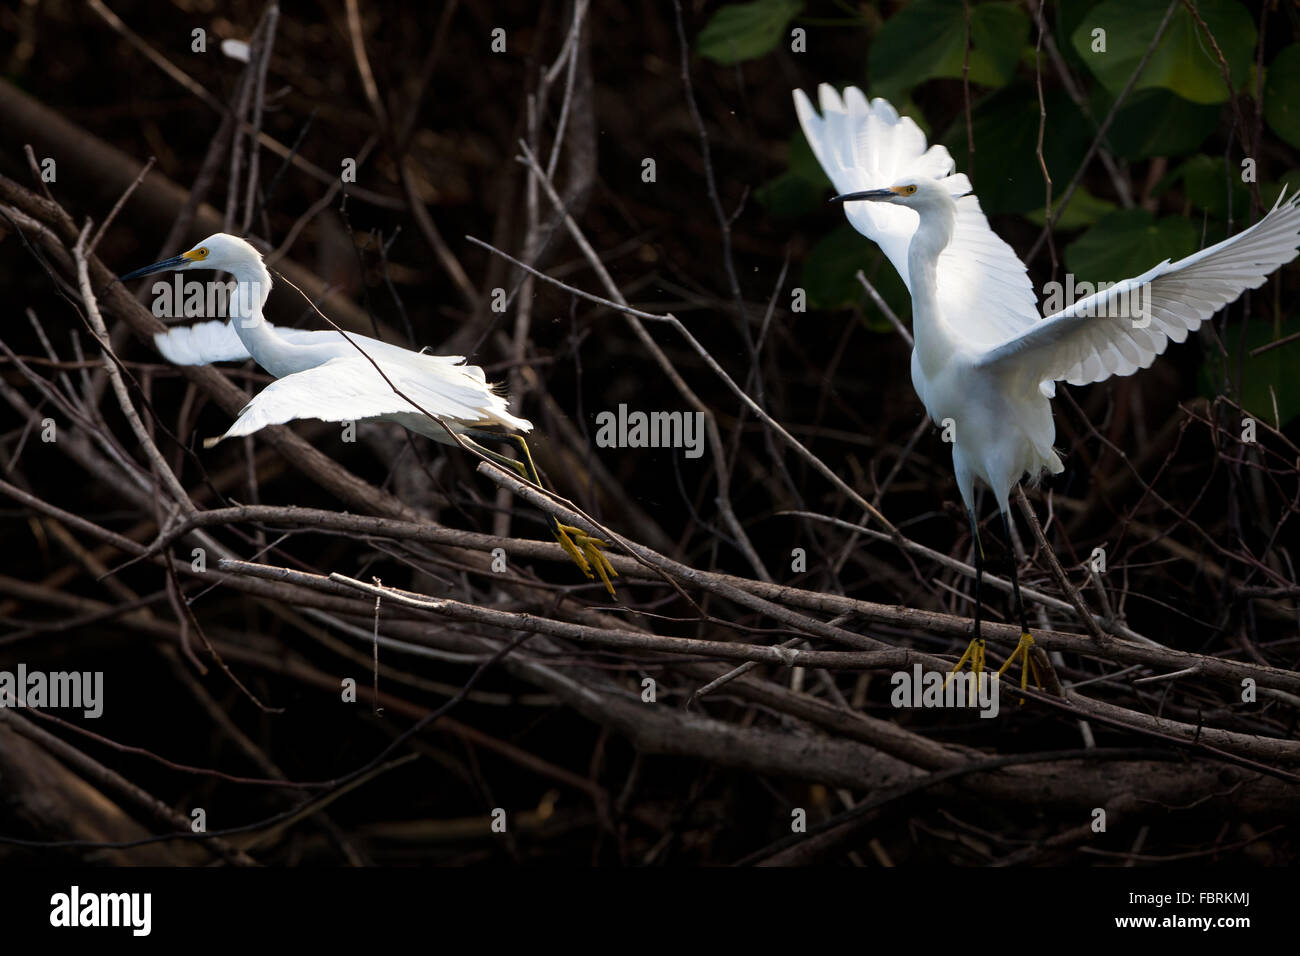 Snowy Egrets, Egretta thula, in the mangrove forest at Coiba national park, Pacific ocean, Veraguas province, Republic of Panama. Stock Photo